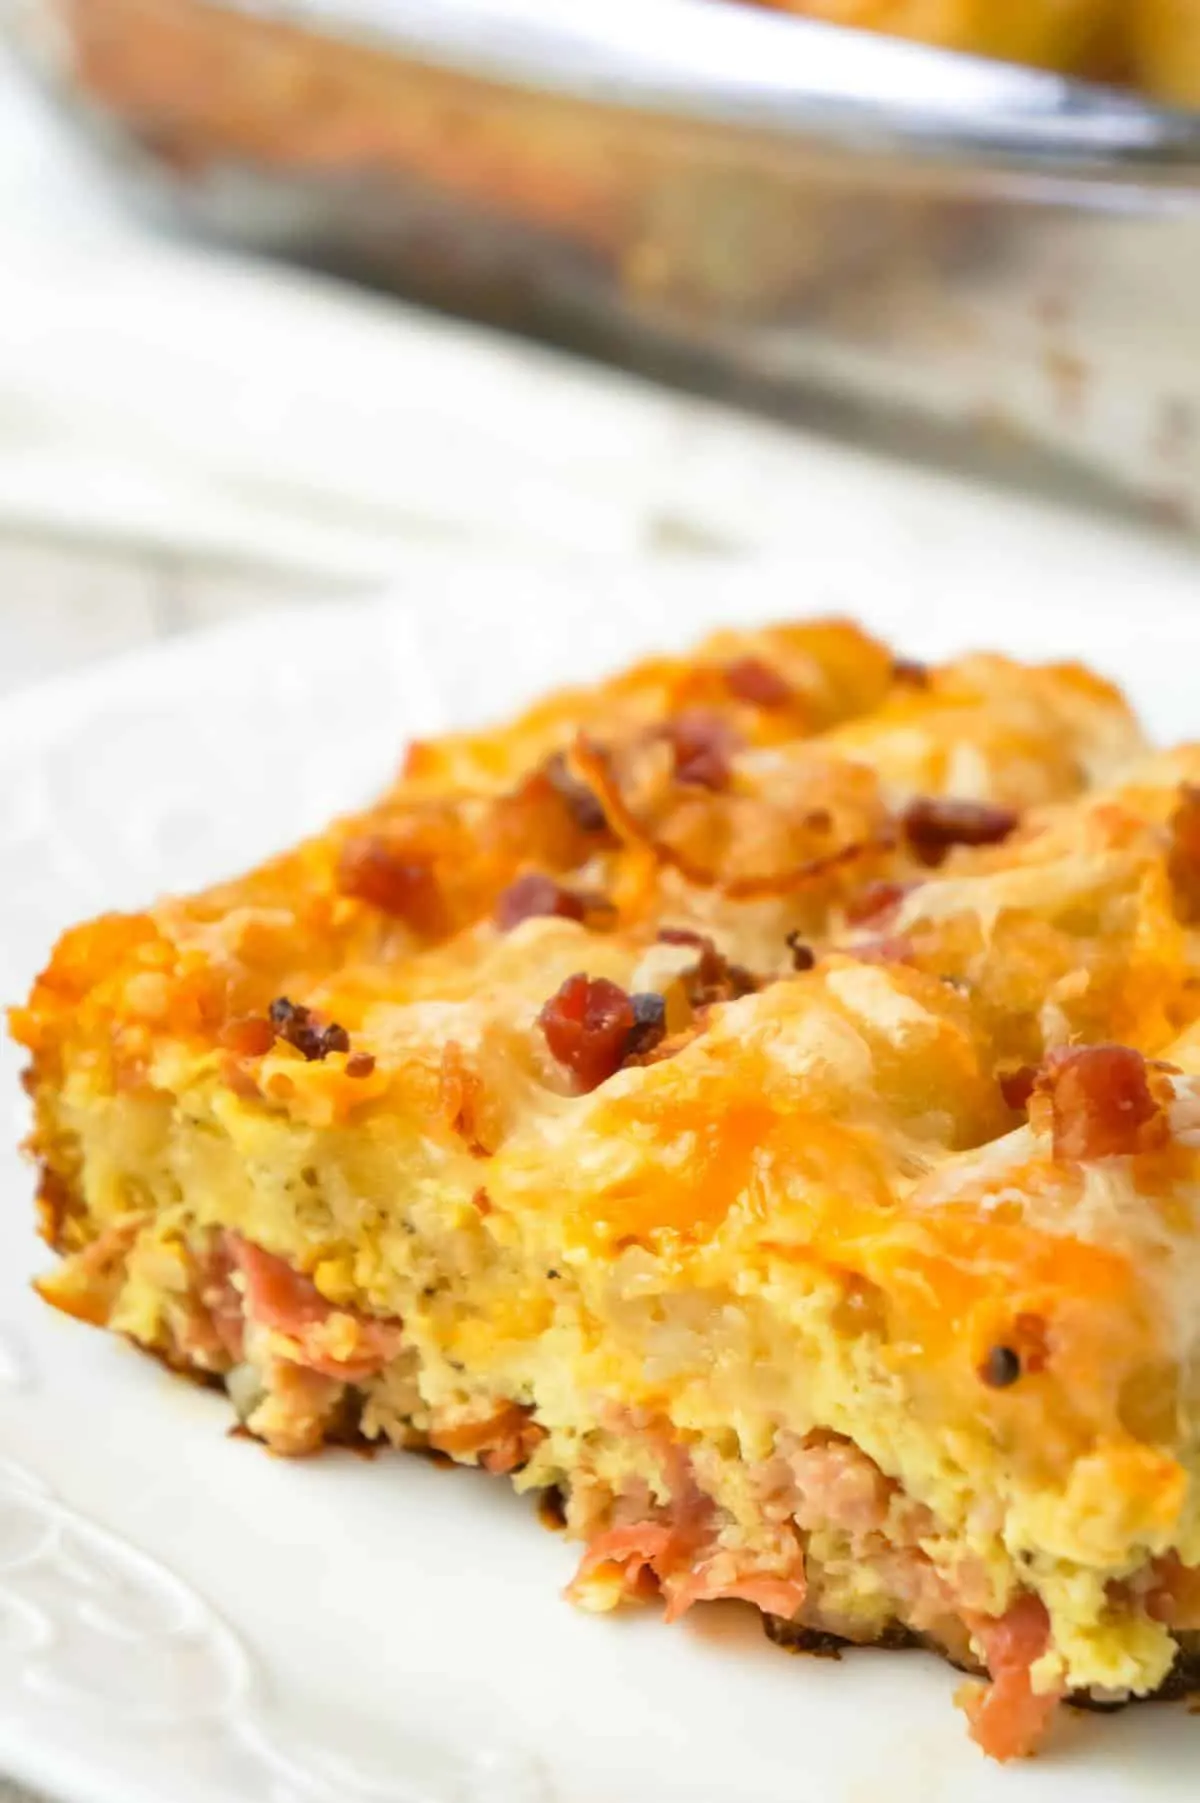 Tater Tot Breakfast Casserole is a hearty casserole recipe loaded with pork sausage meat, diced onion, chopped ham, crumbled bacon, eggs, shredded cheese and topped with tater tots.